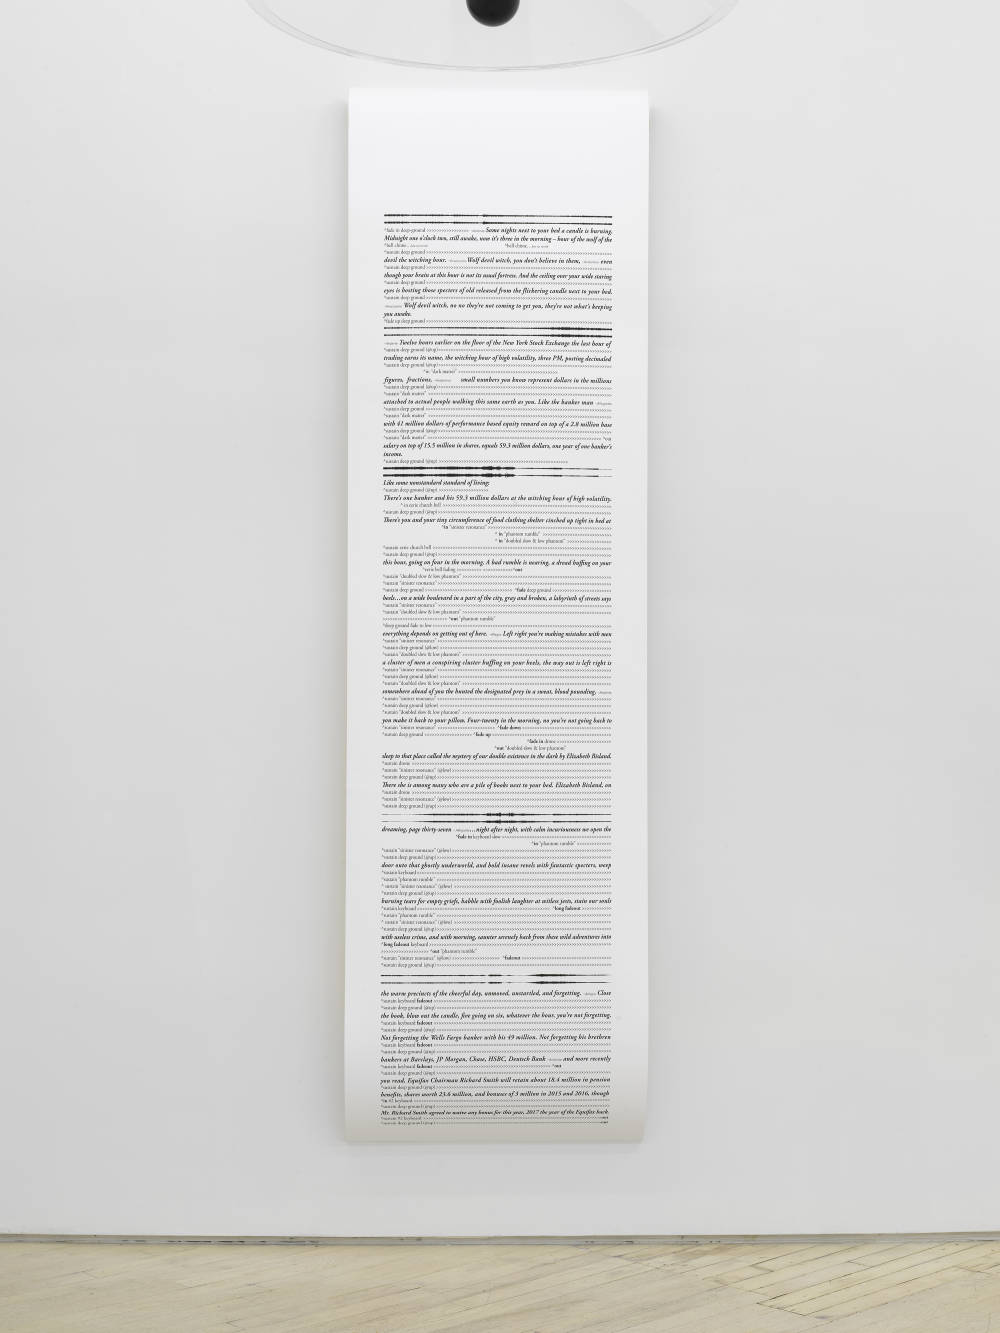 A large vertical scroll installed on a wall with black and white text.